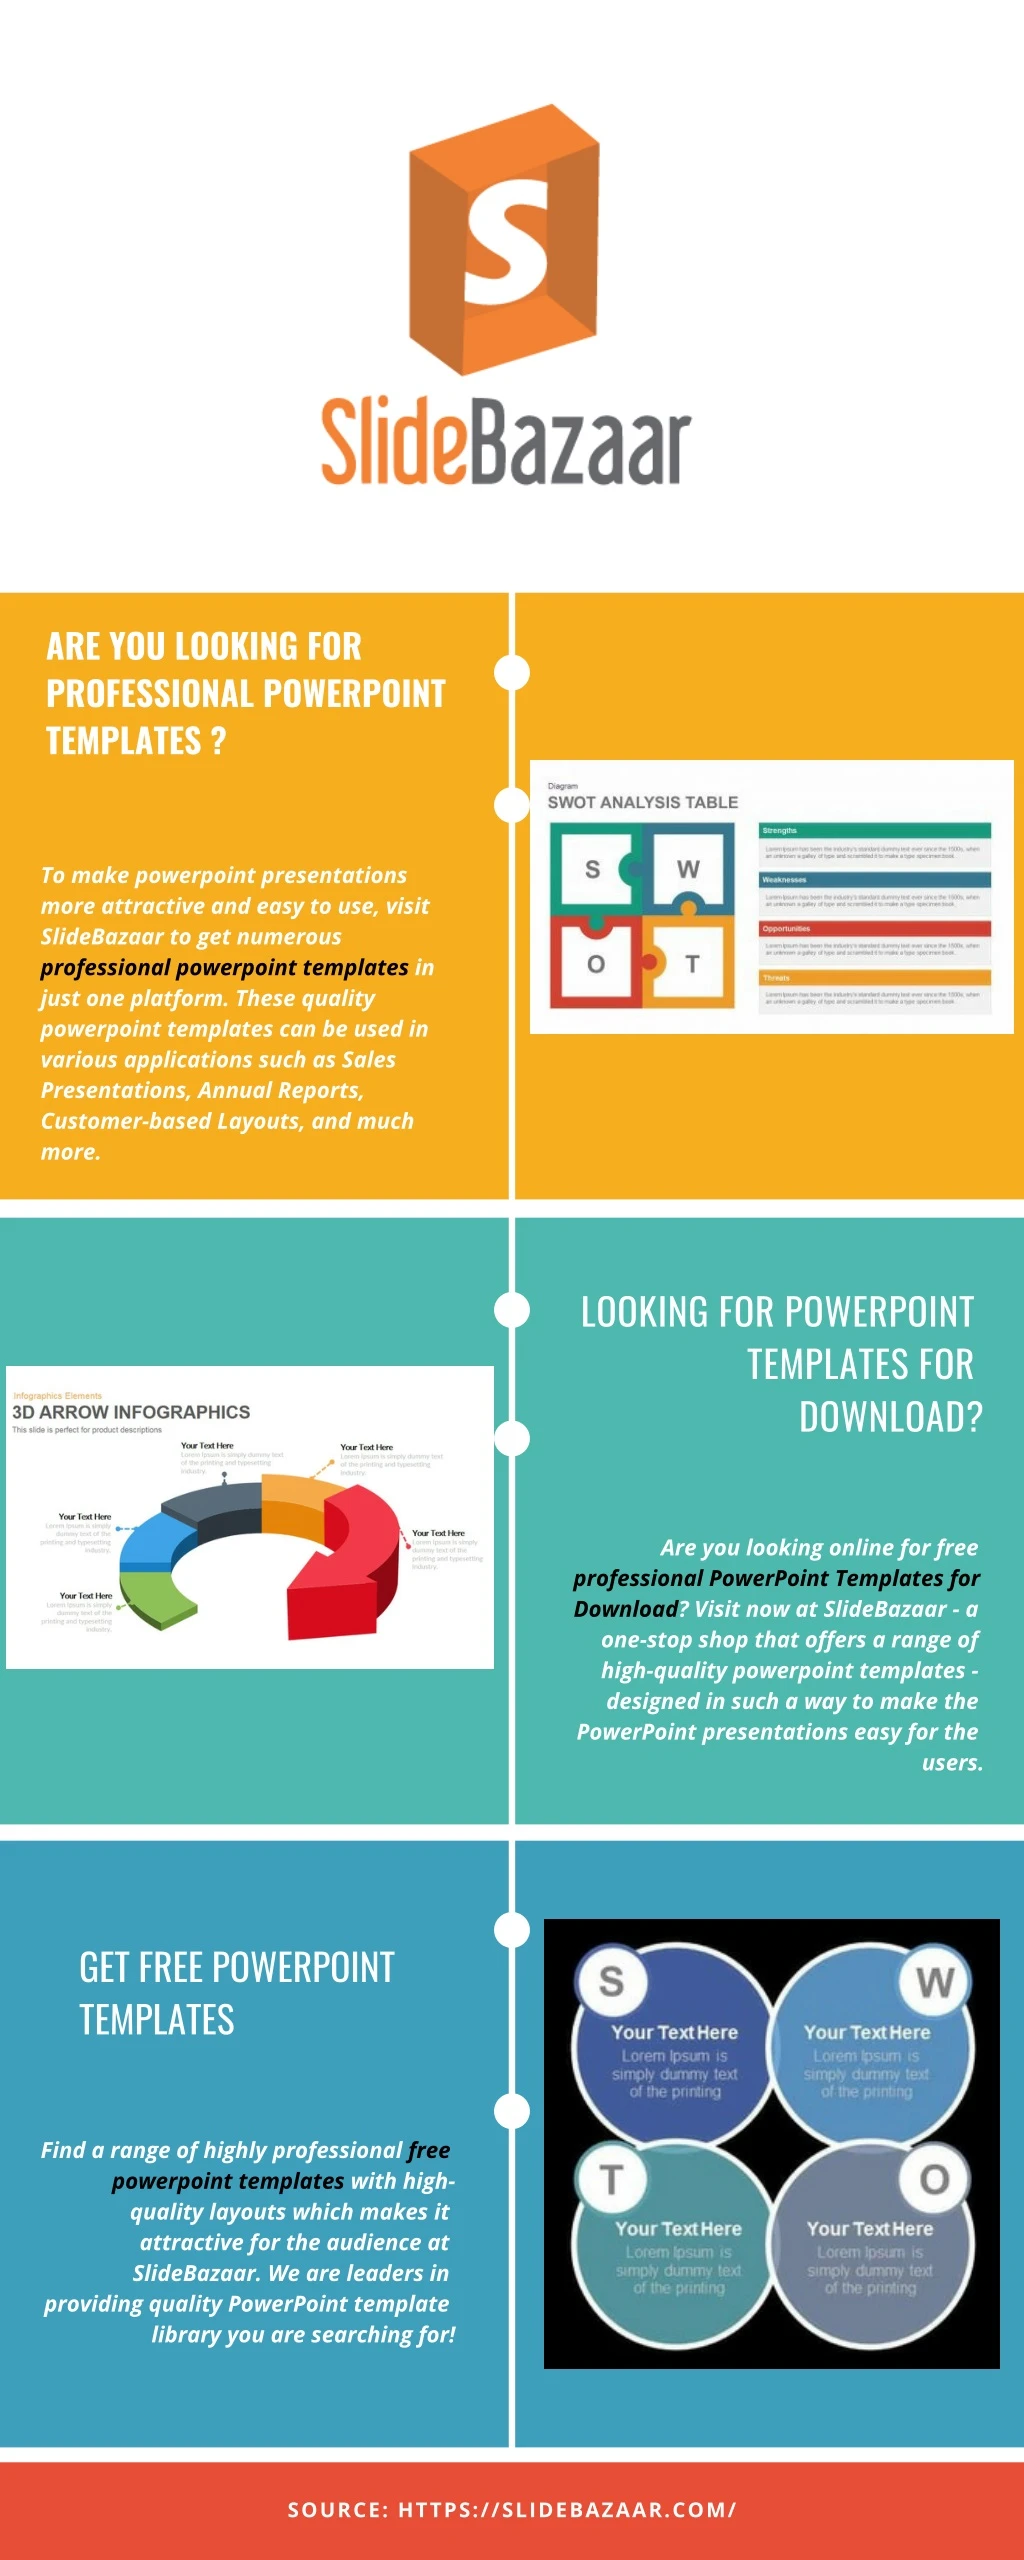 are you looking for professional powerpoint